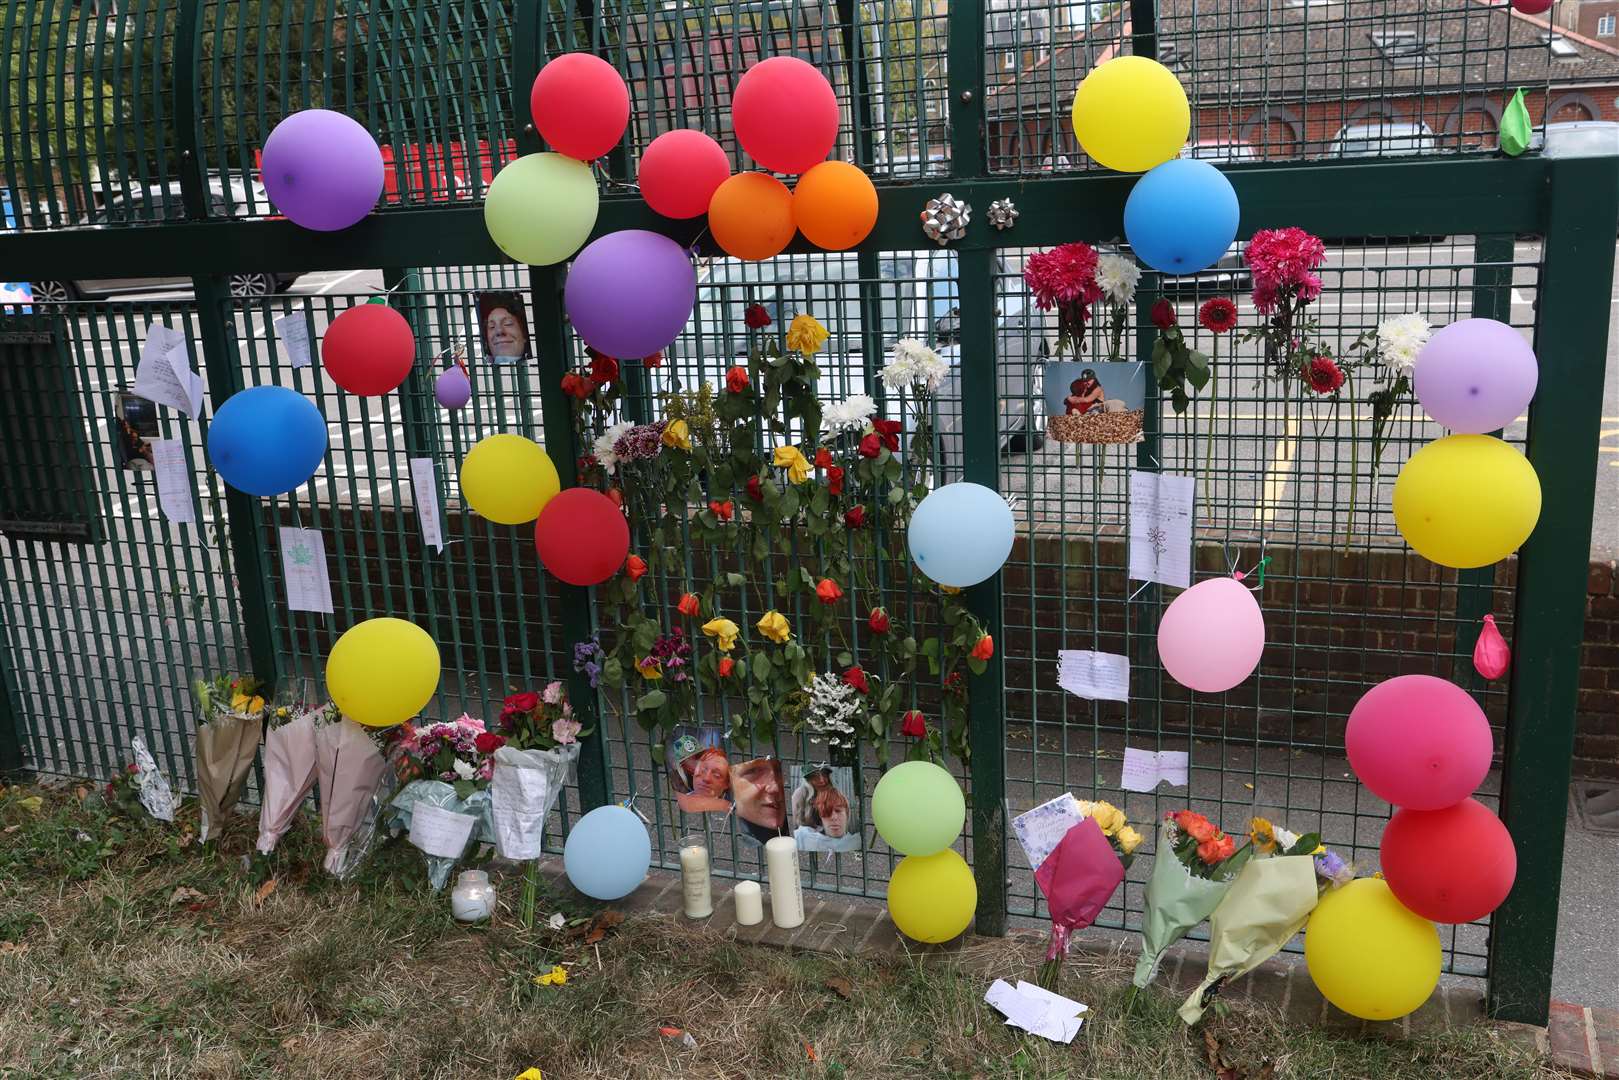 Tributes were left at the scene. Photo: UKNIP